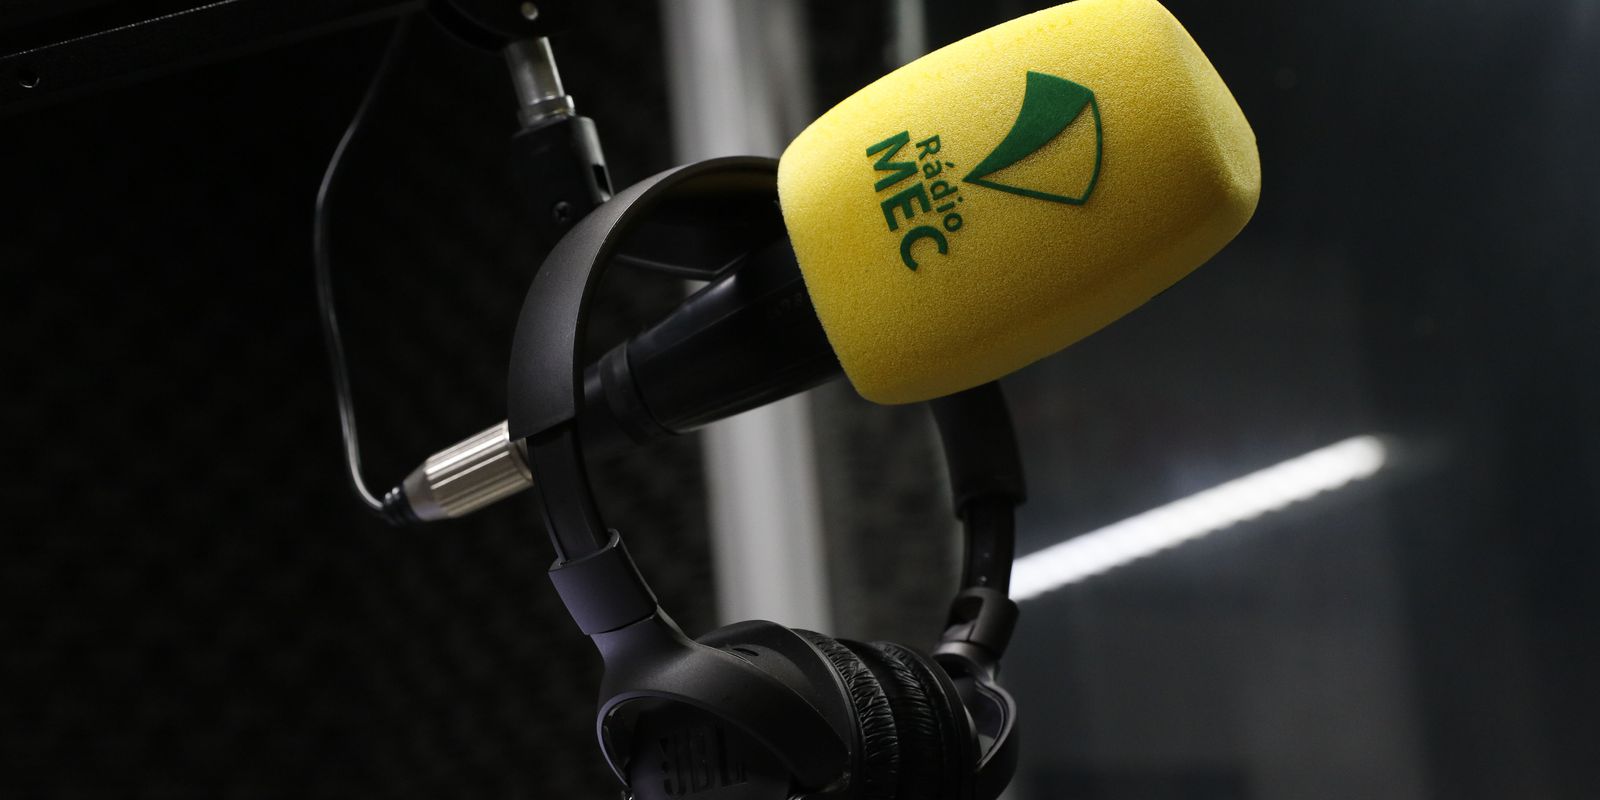 Rádio MEC presents a special on National Classical Music Day